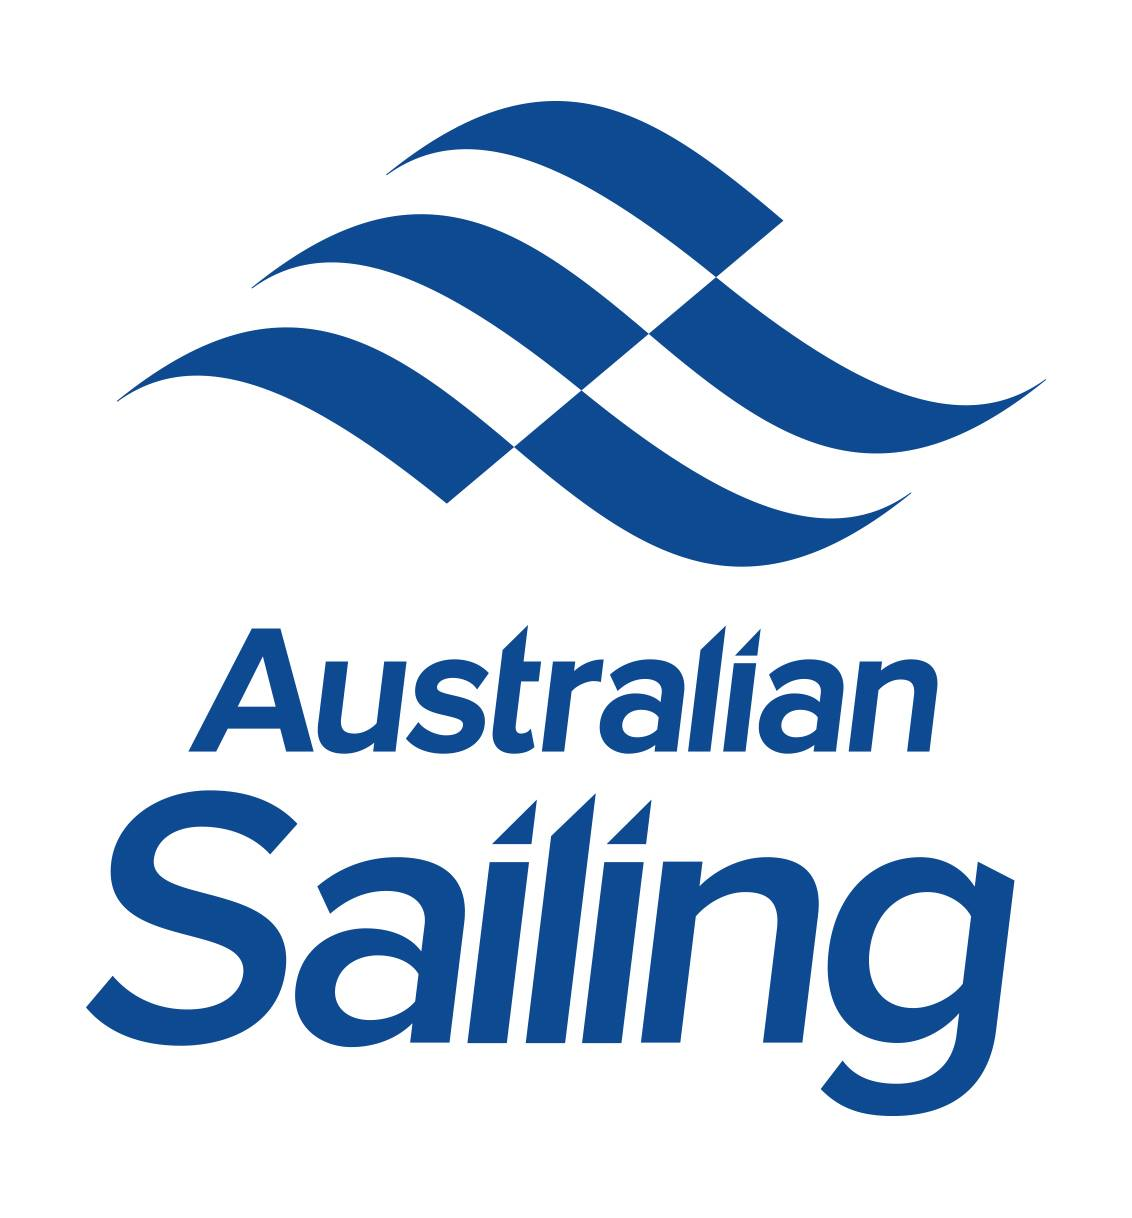 Australian Sailing appoints Brett and Palk to oversee pathways for new Paris 2024 classes